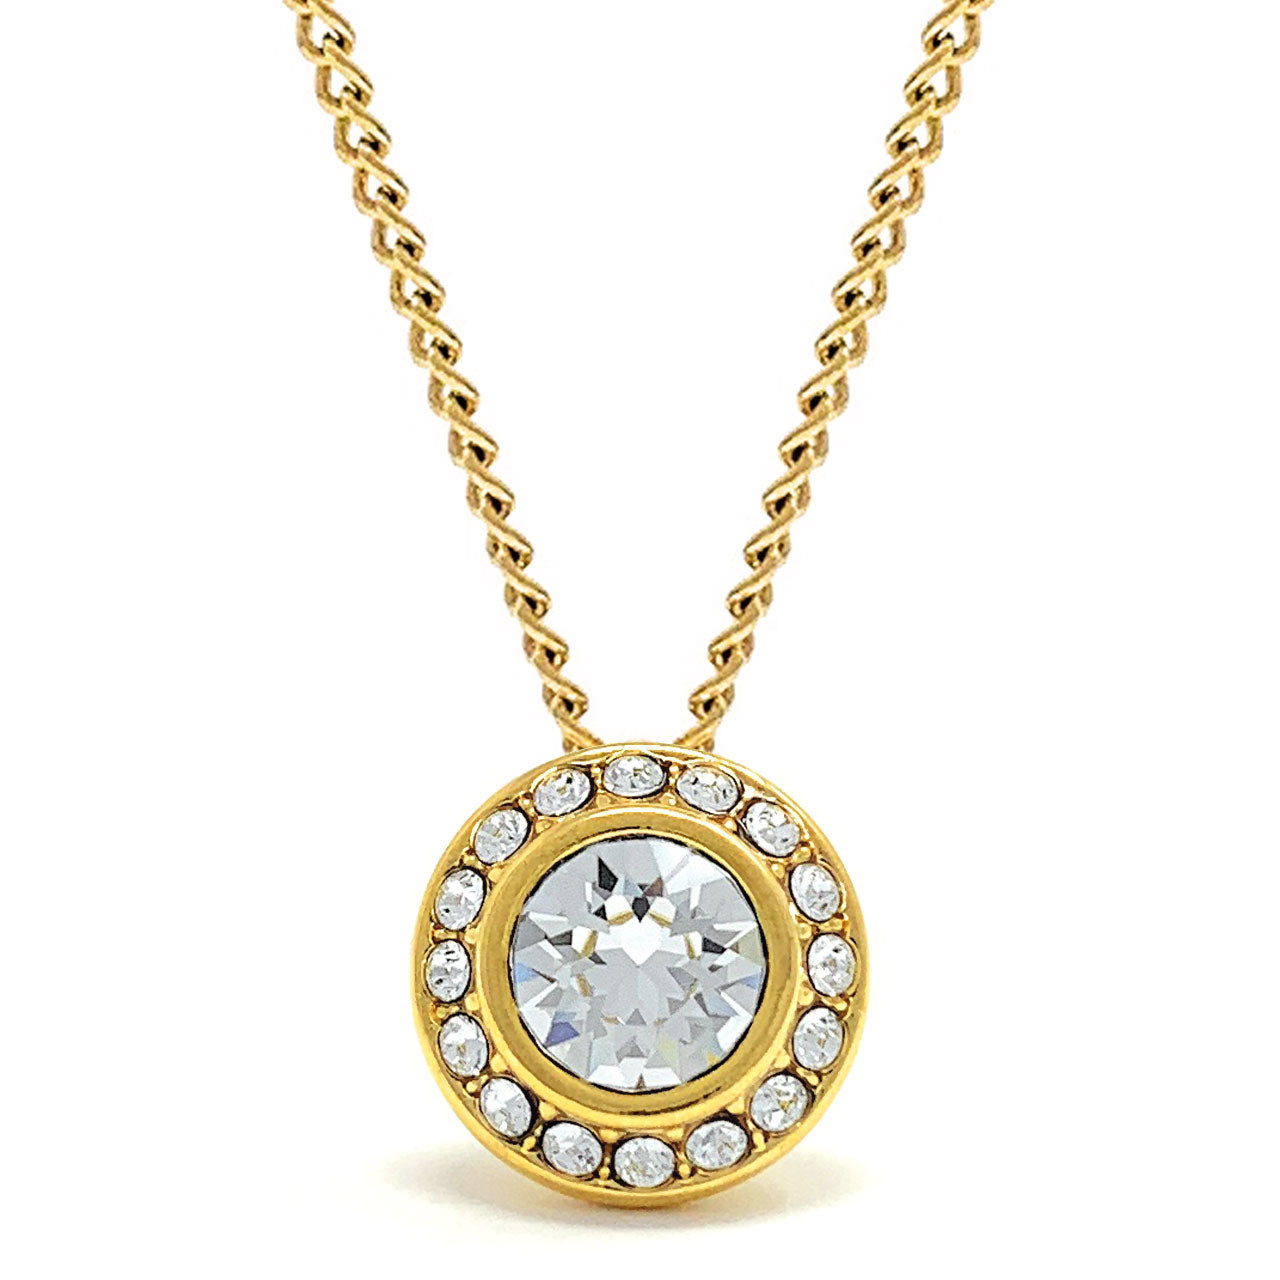 Halo Pave Pendant Necklace with White Clear Round Crystals from Swarovski Gold Plated - Ed Heart